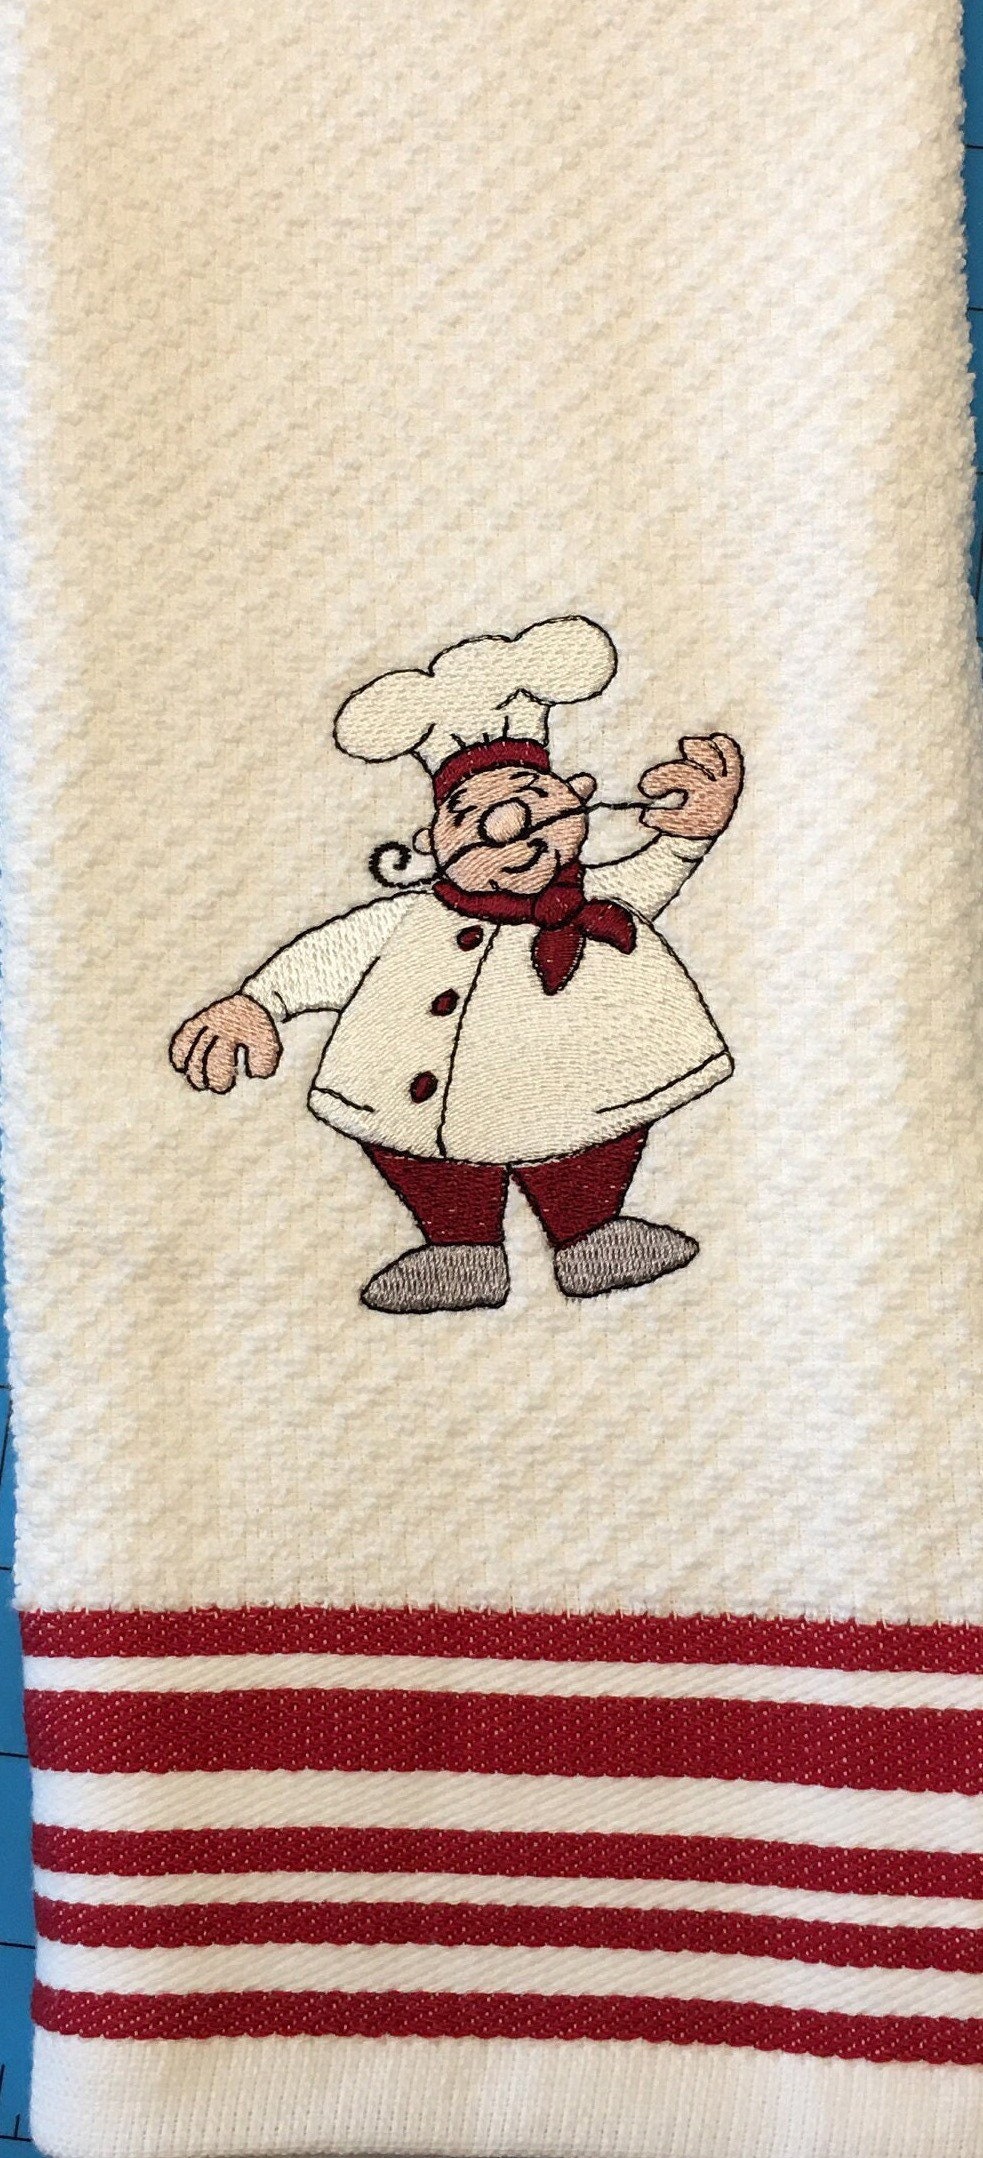 Fat Chef Towel Home Collection Kitchen Towel 15 x 25 NWT 100% Cotton